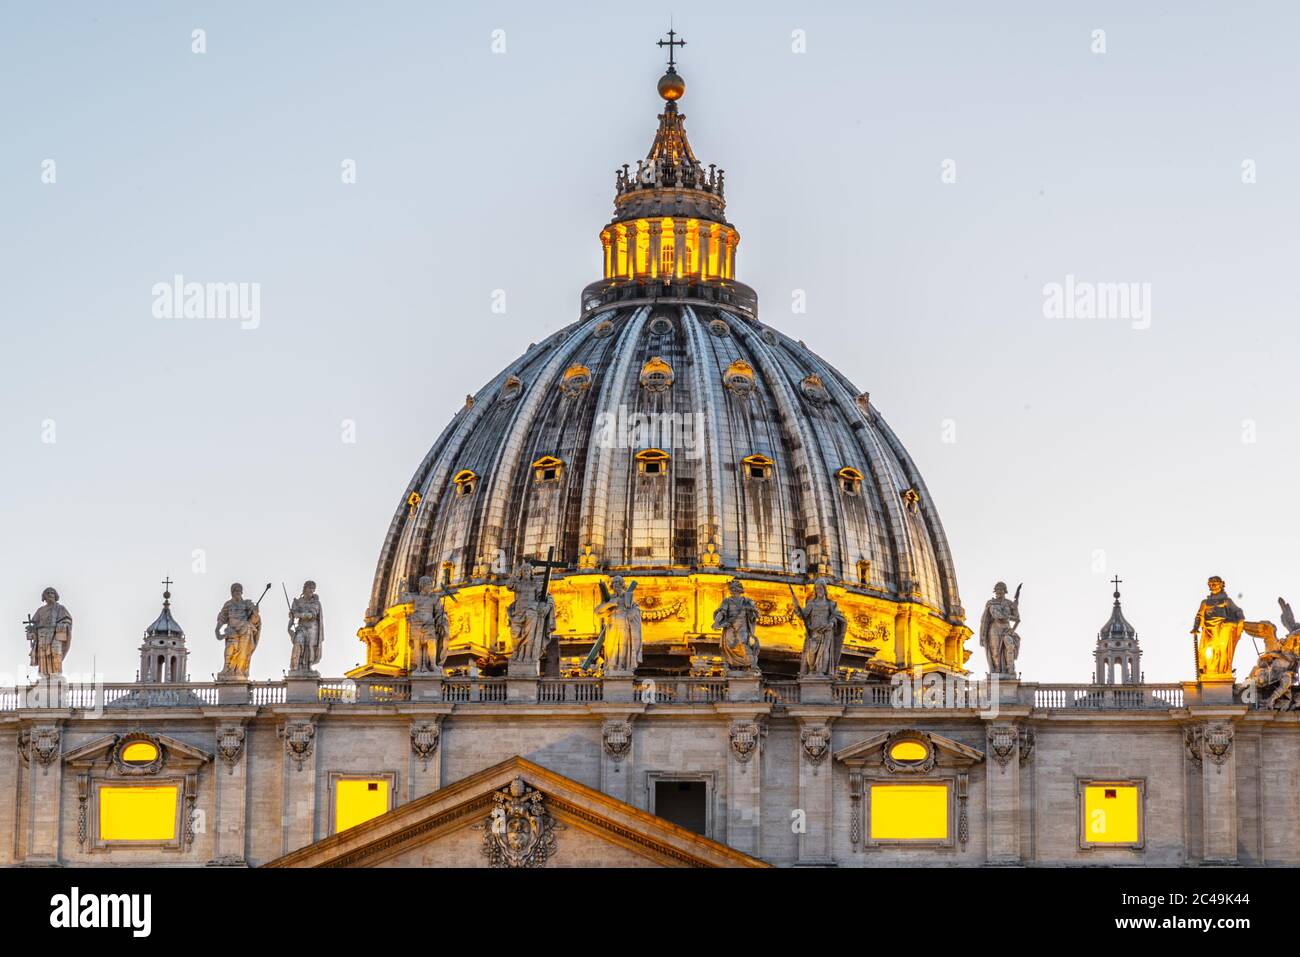 Dome of St Peters Basilica in Vatican City, Rome, Italy. Illuminated by night. Stock Photo